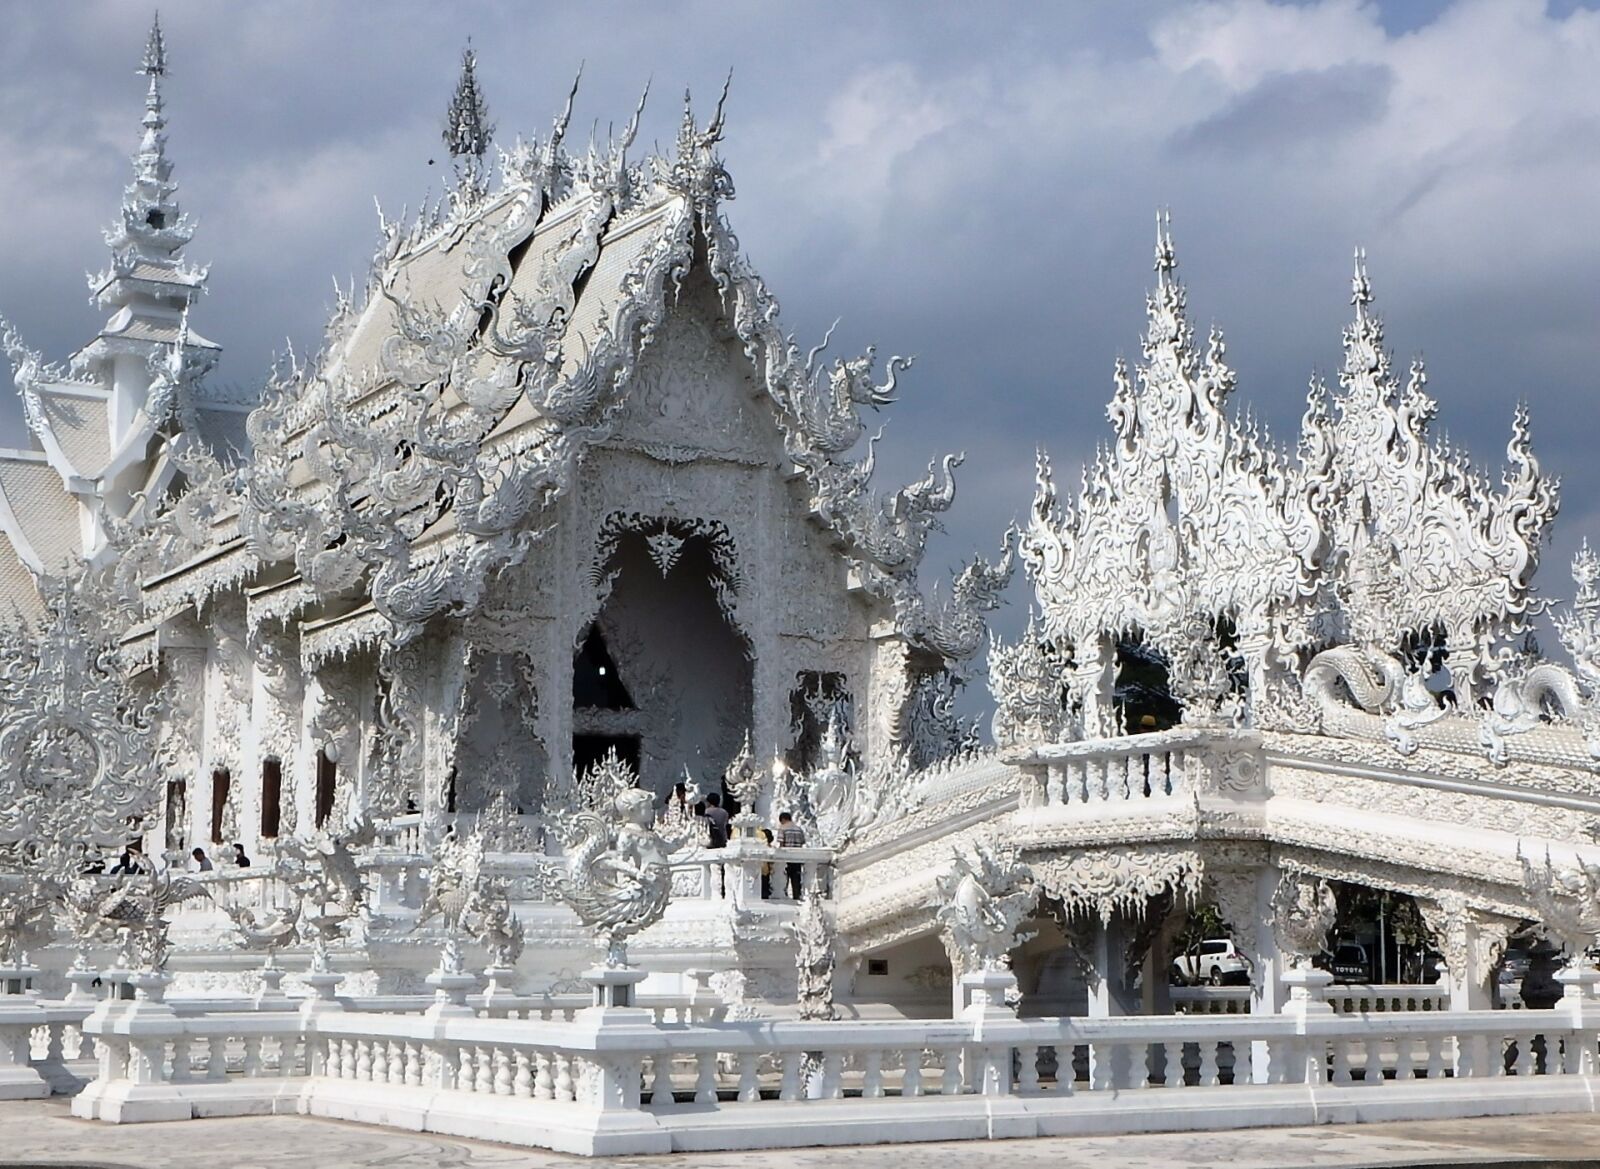 Olympus TG-860 sample photo. White temple, thailand, chiang photography